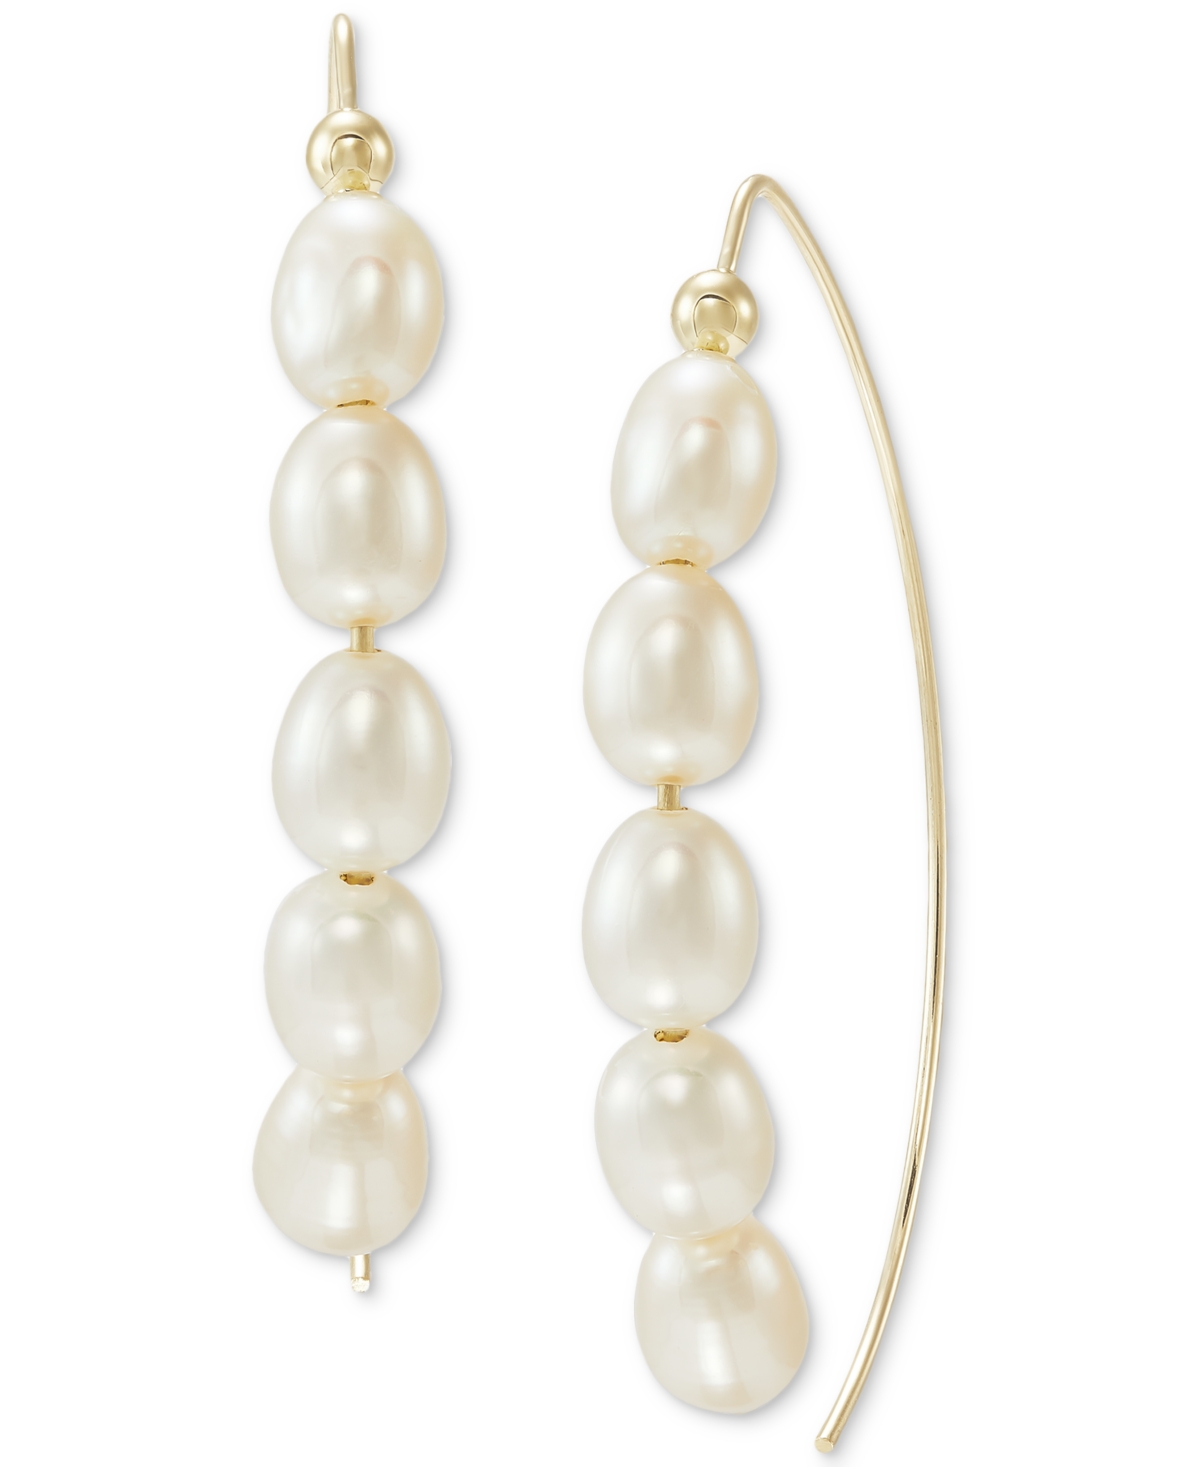 Cultured Freshwater Rice Pearl (5-6mm) Threader Earrings in 10k Gold - Gold